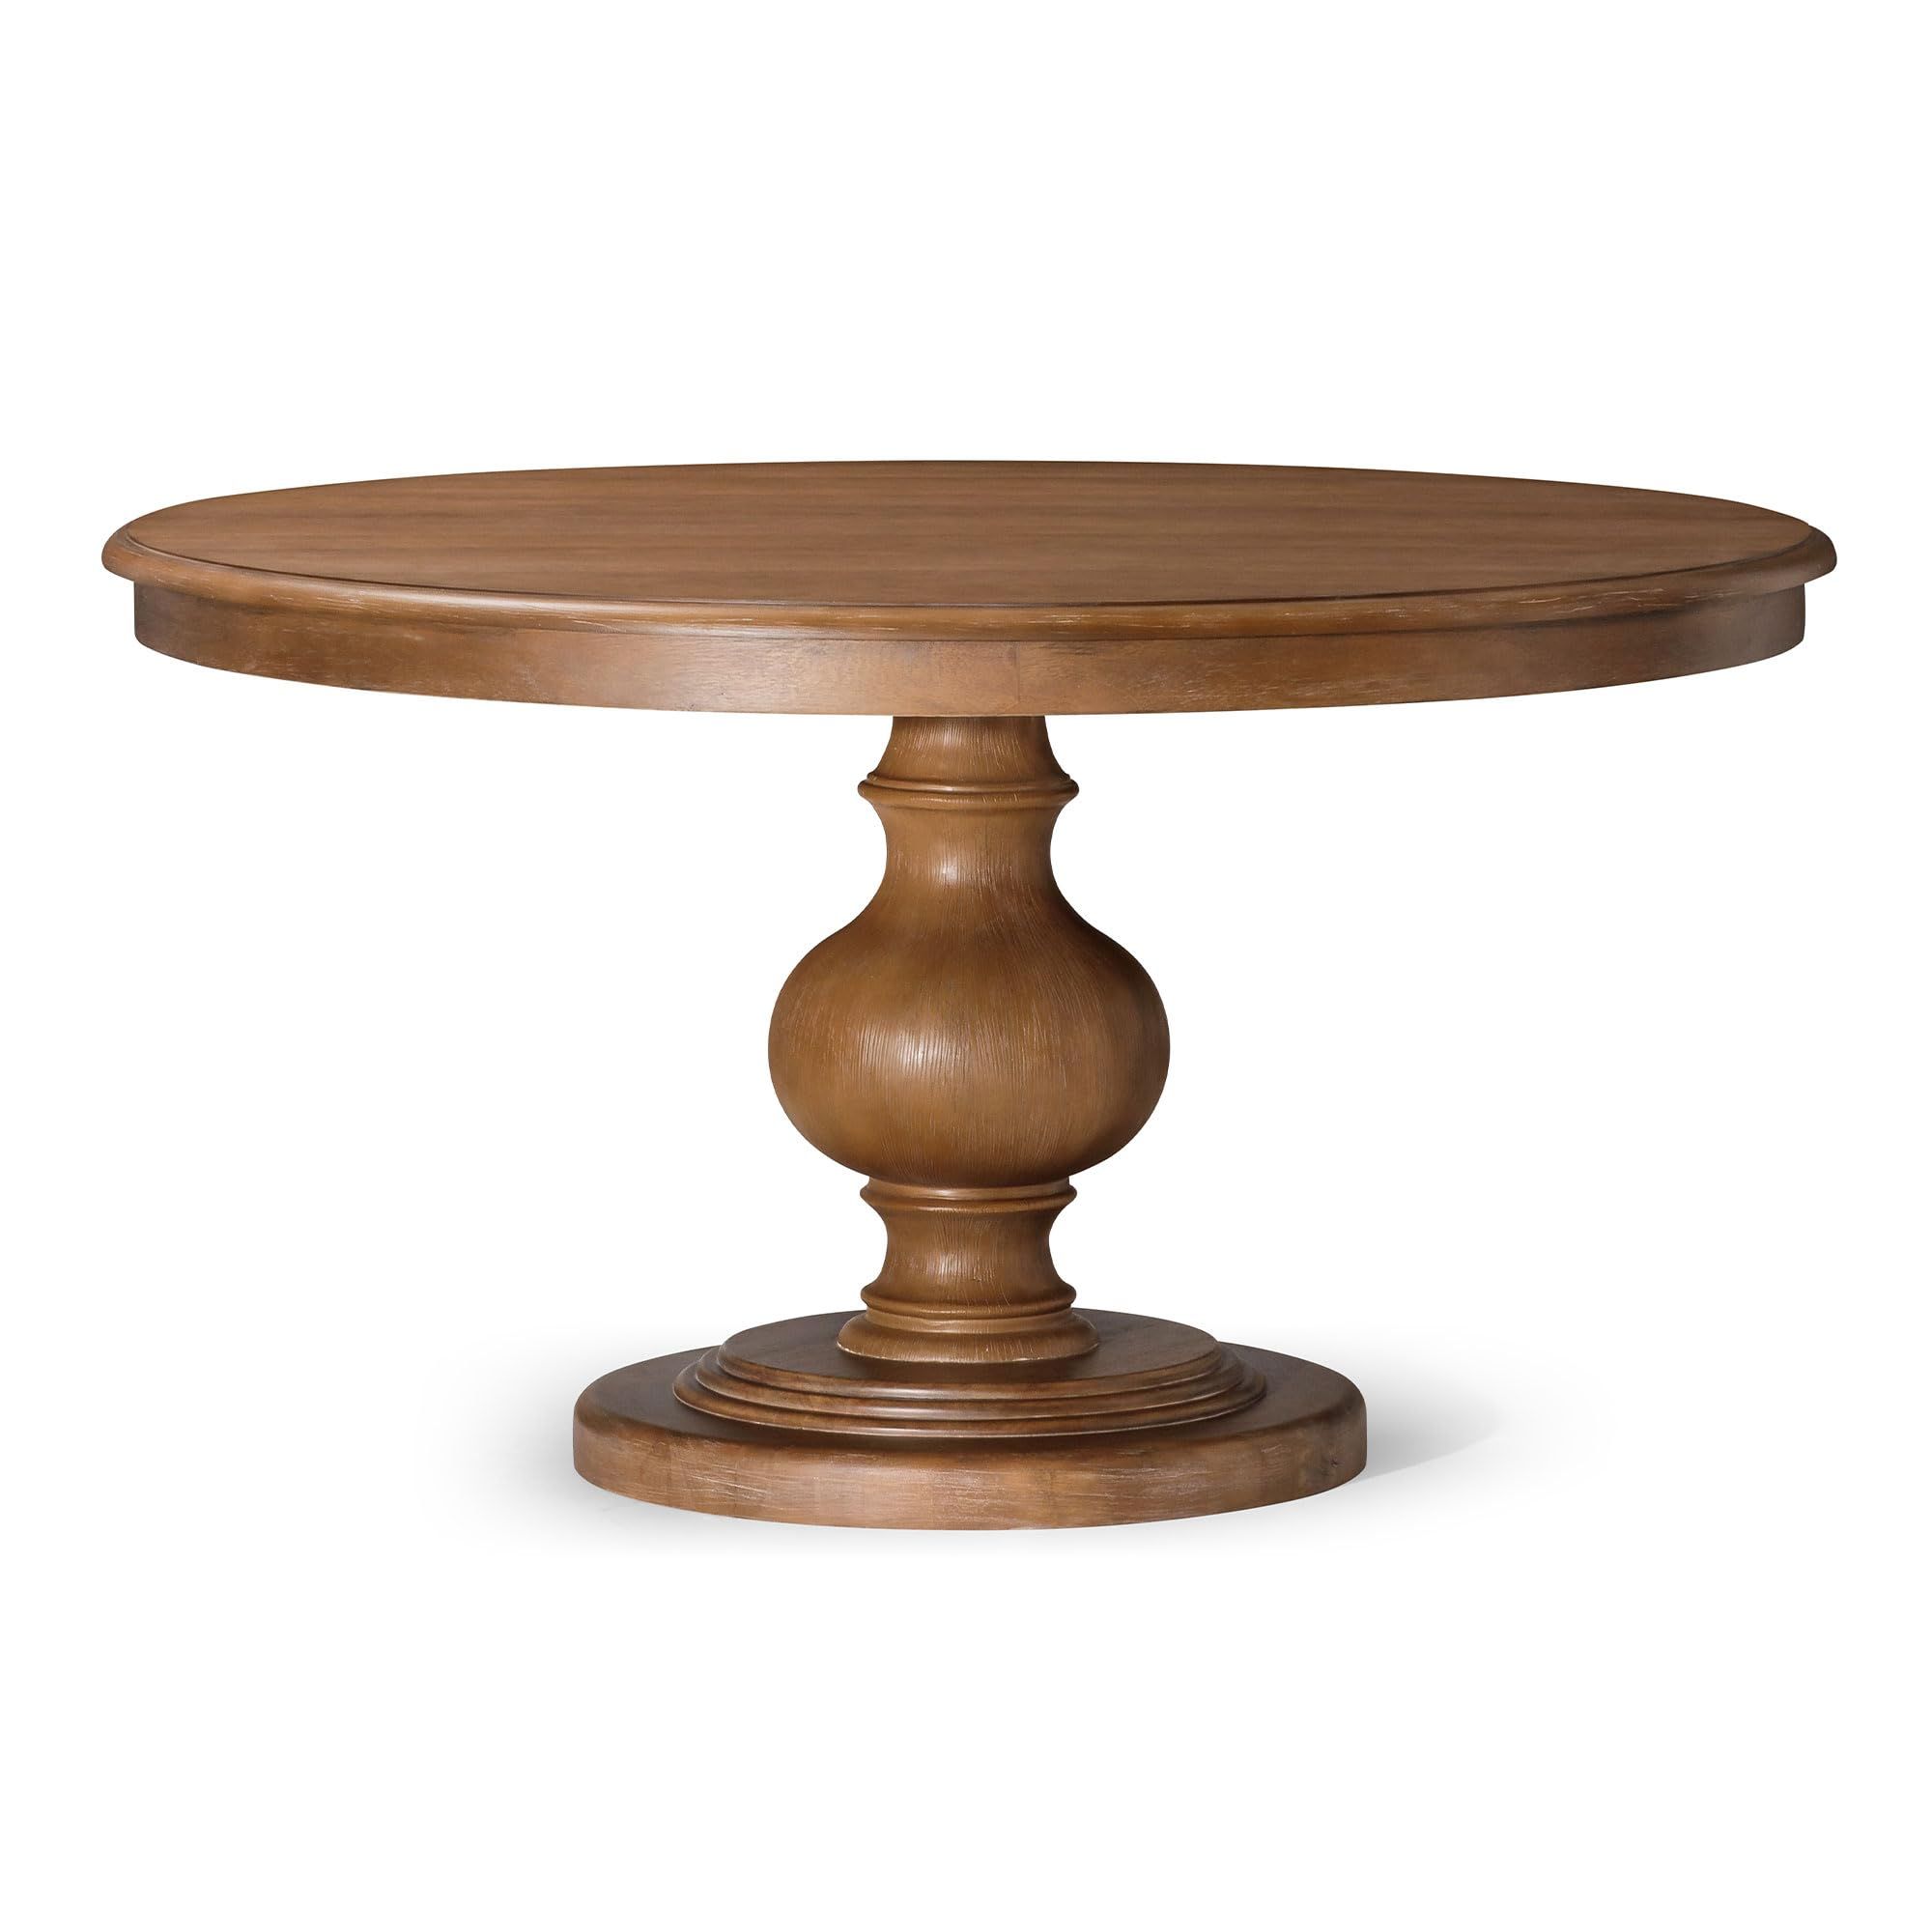 Maven Lane Zola Traditional Large Round Circle Wooden Pedestal Dining Table for Modern Kitchen, Bistro, or Card Table in Antiqued Natural Finish | Amazon (US)